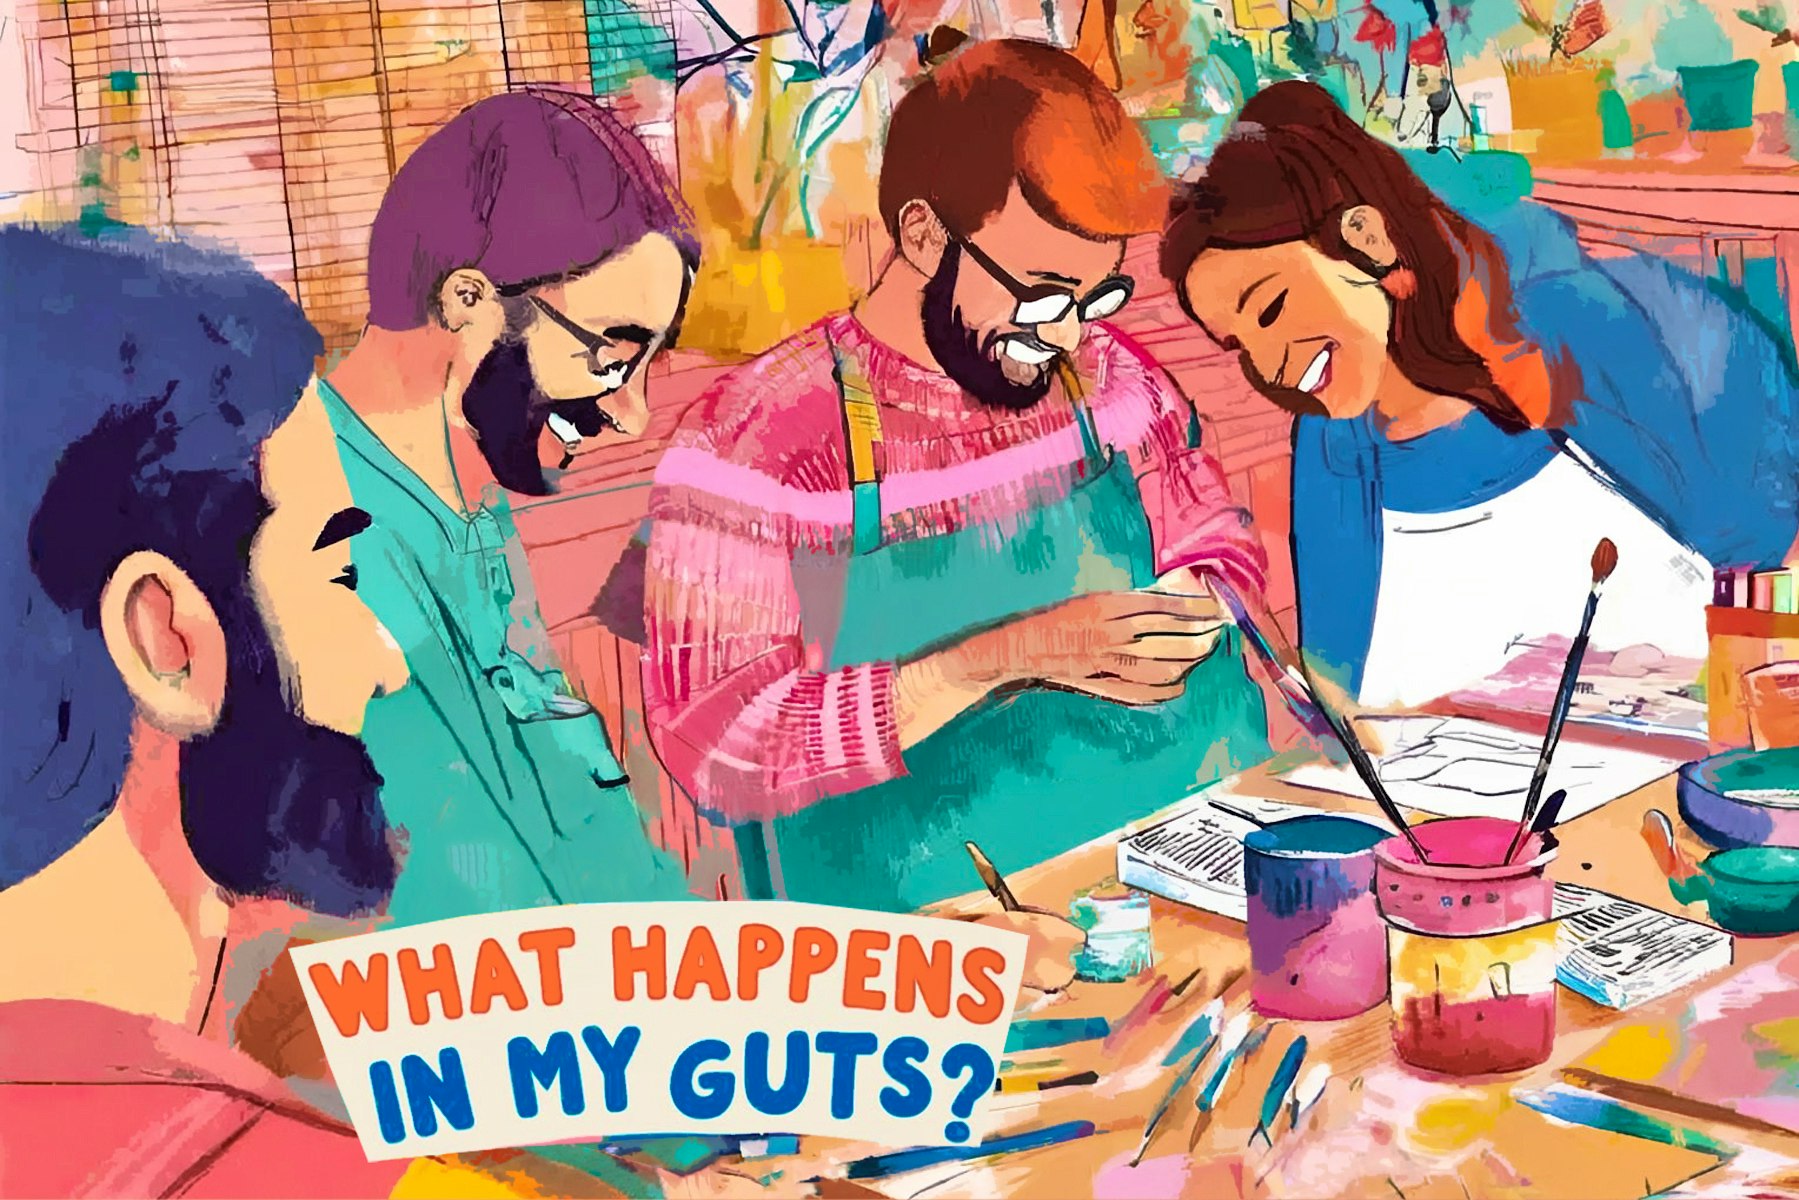 What happens in my guts?